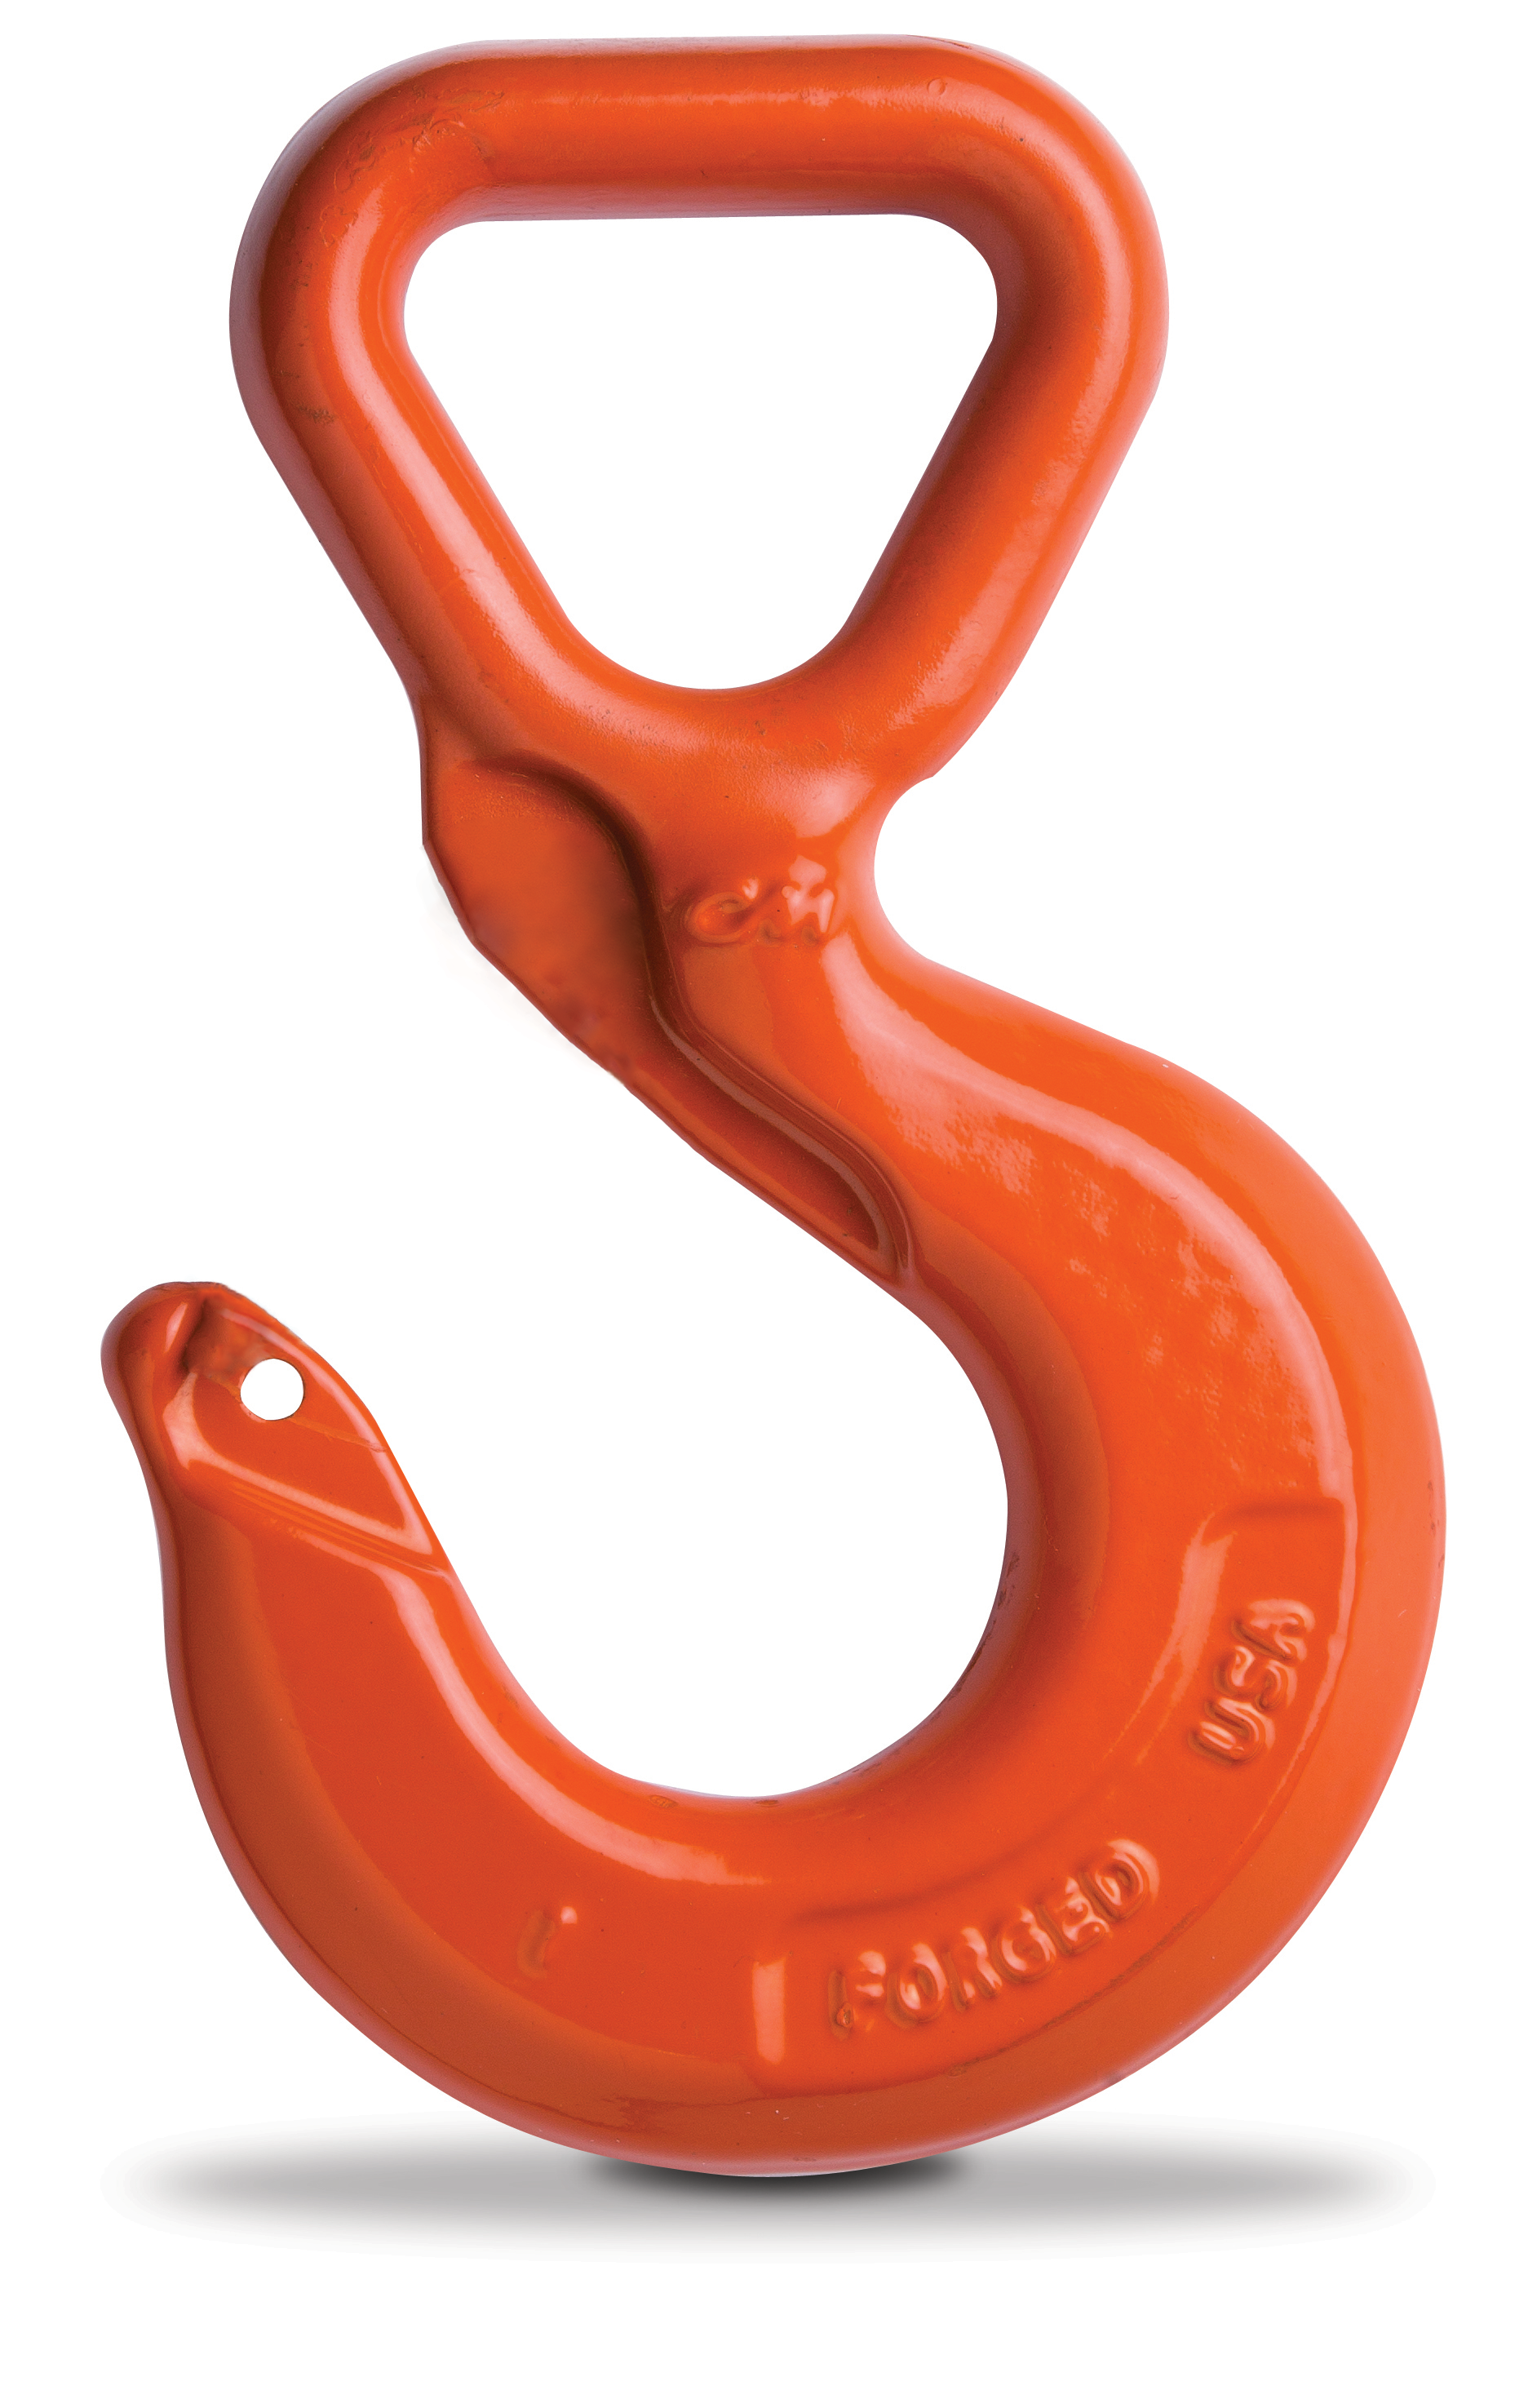 https://tsriggingequipment.com/store/images/thumbs/0003678_cm-flat-eye-rigging-hook-working-load-limit-10000-lbs-part-no-m8407.png